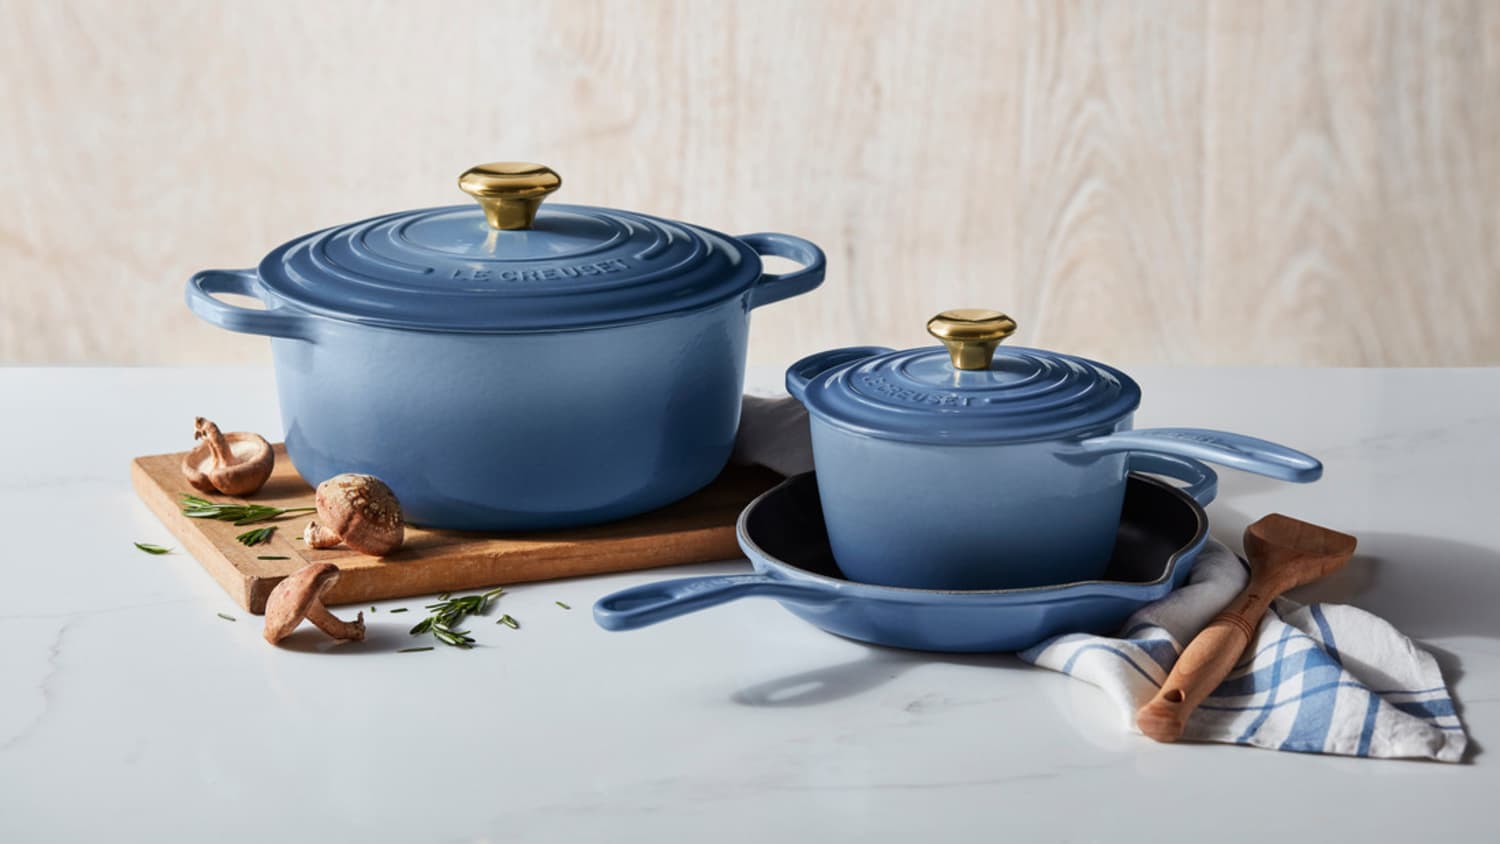 Le Creuset Prime Day Deals Include Dutch Ovens, Skillets, and More